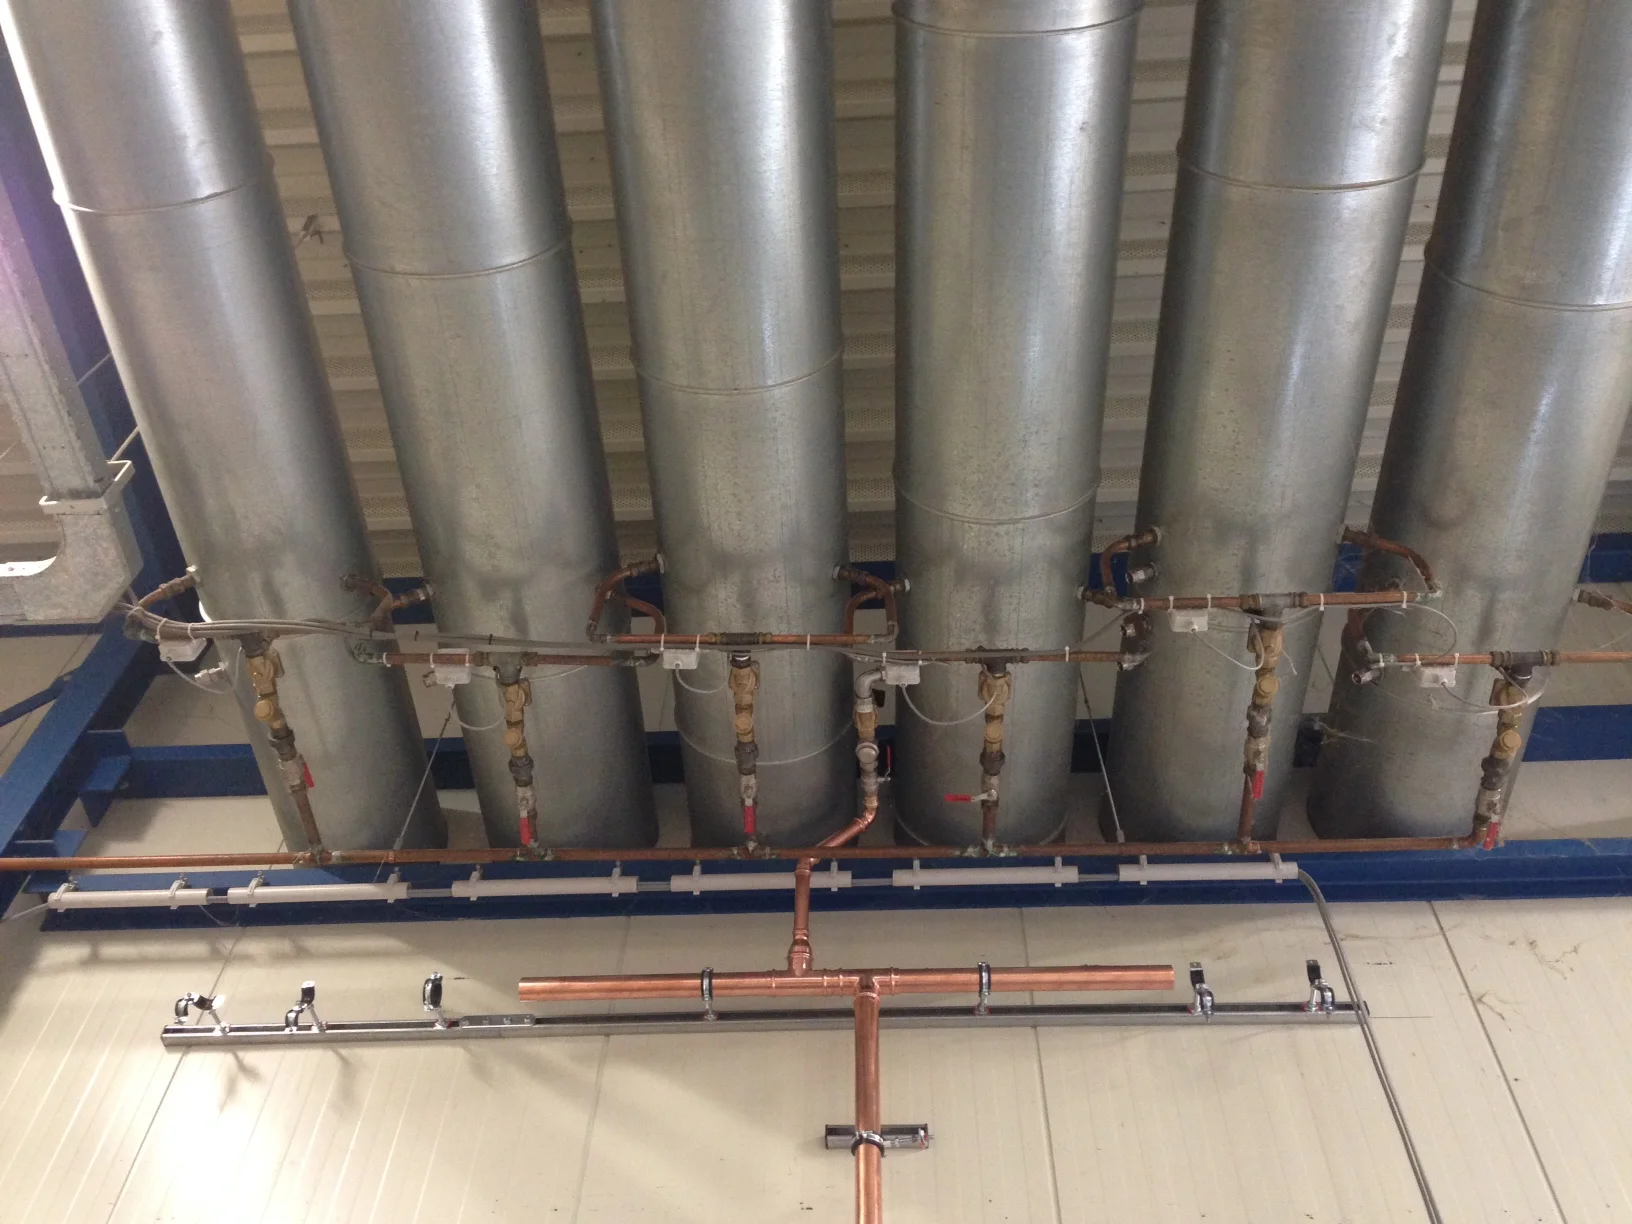 Spark Extinguishing Nozzles Installed In Ducts